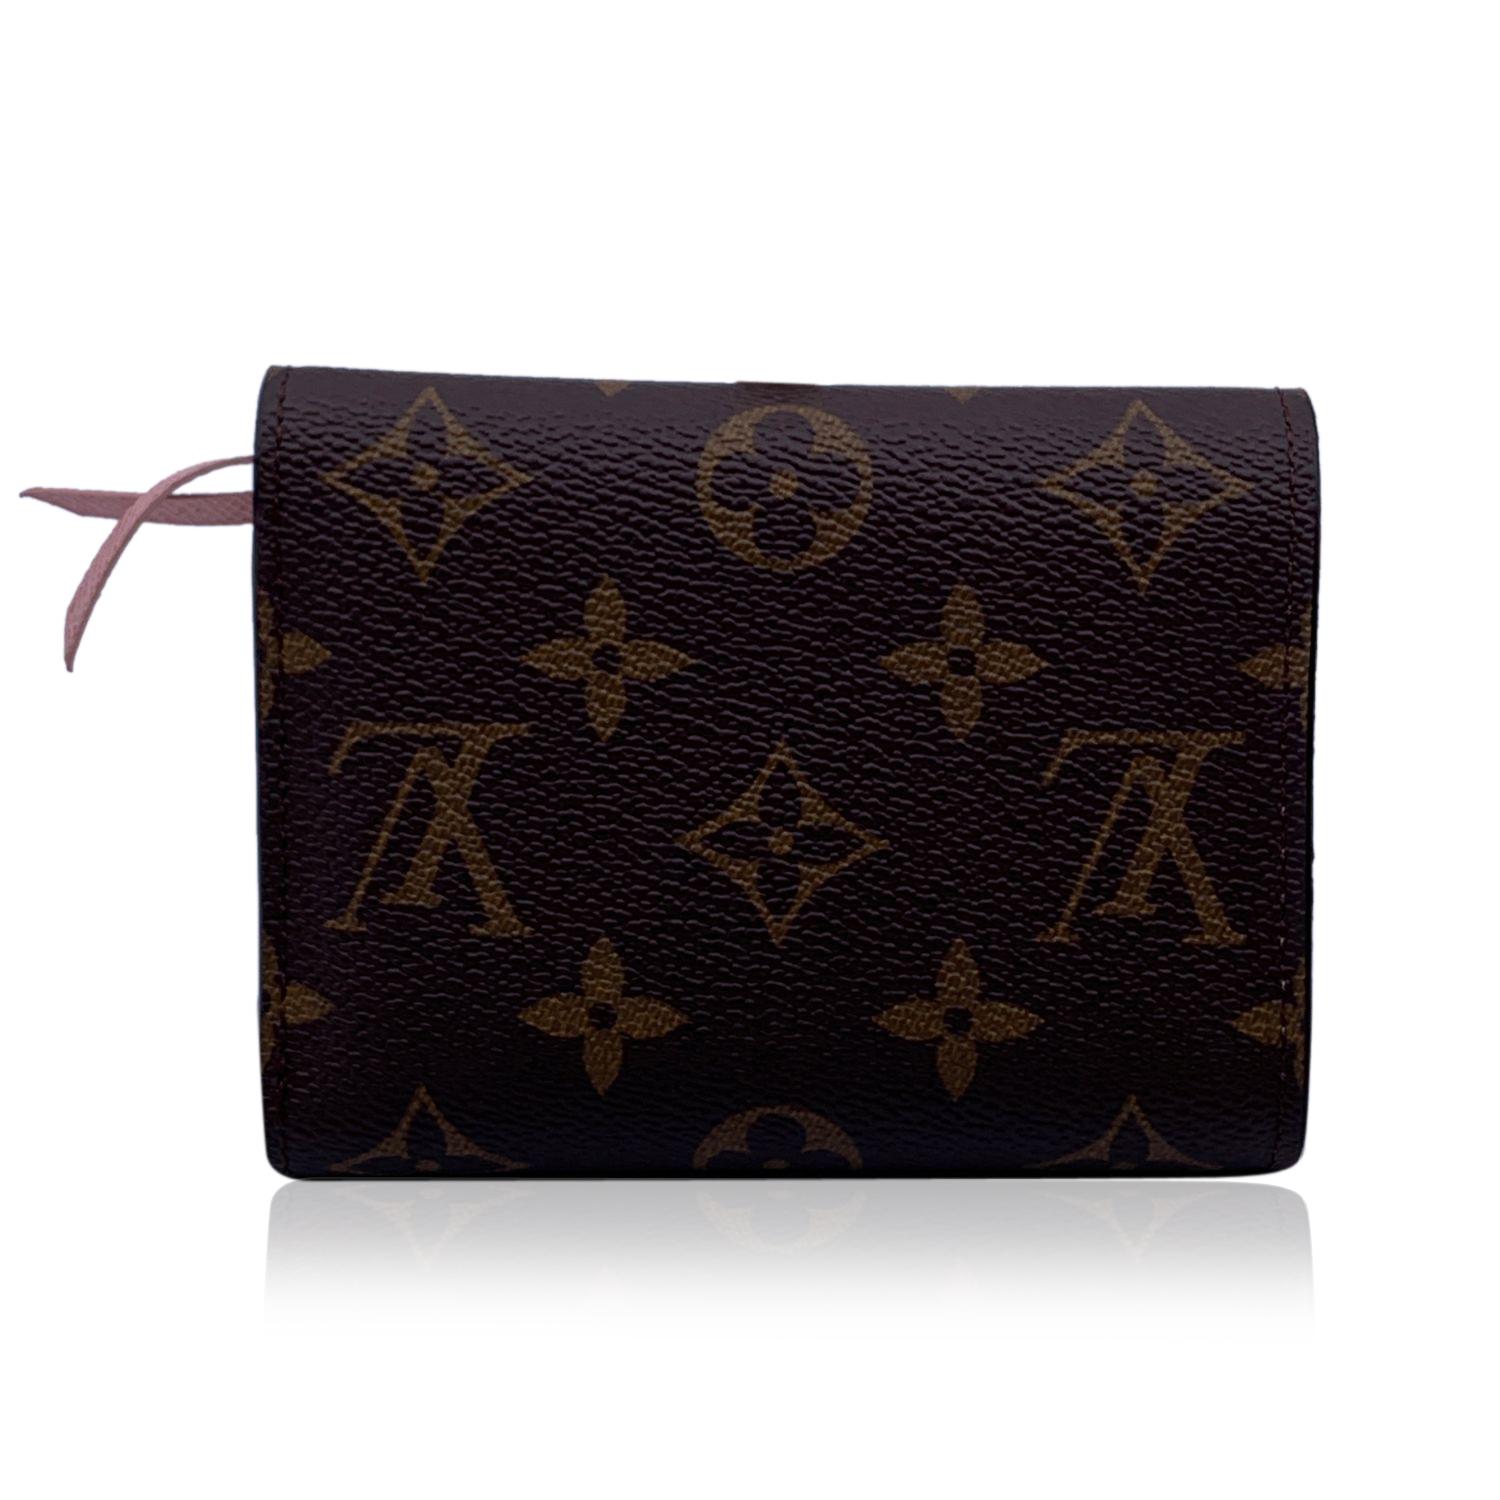 Louis Vuitton Monogram Canvas Victorine Wallet. Monogram canvas exterior and pink genuine leather interior. Snap closure.1 zip coin section, 1 bill compartment, 2 open pockets and 6 credit card slots. 'LOUIS VUITTON Paris - Made in France' embossed